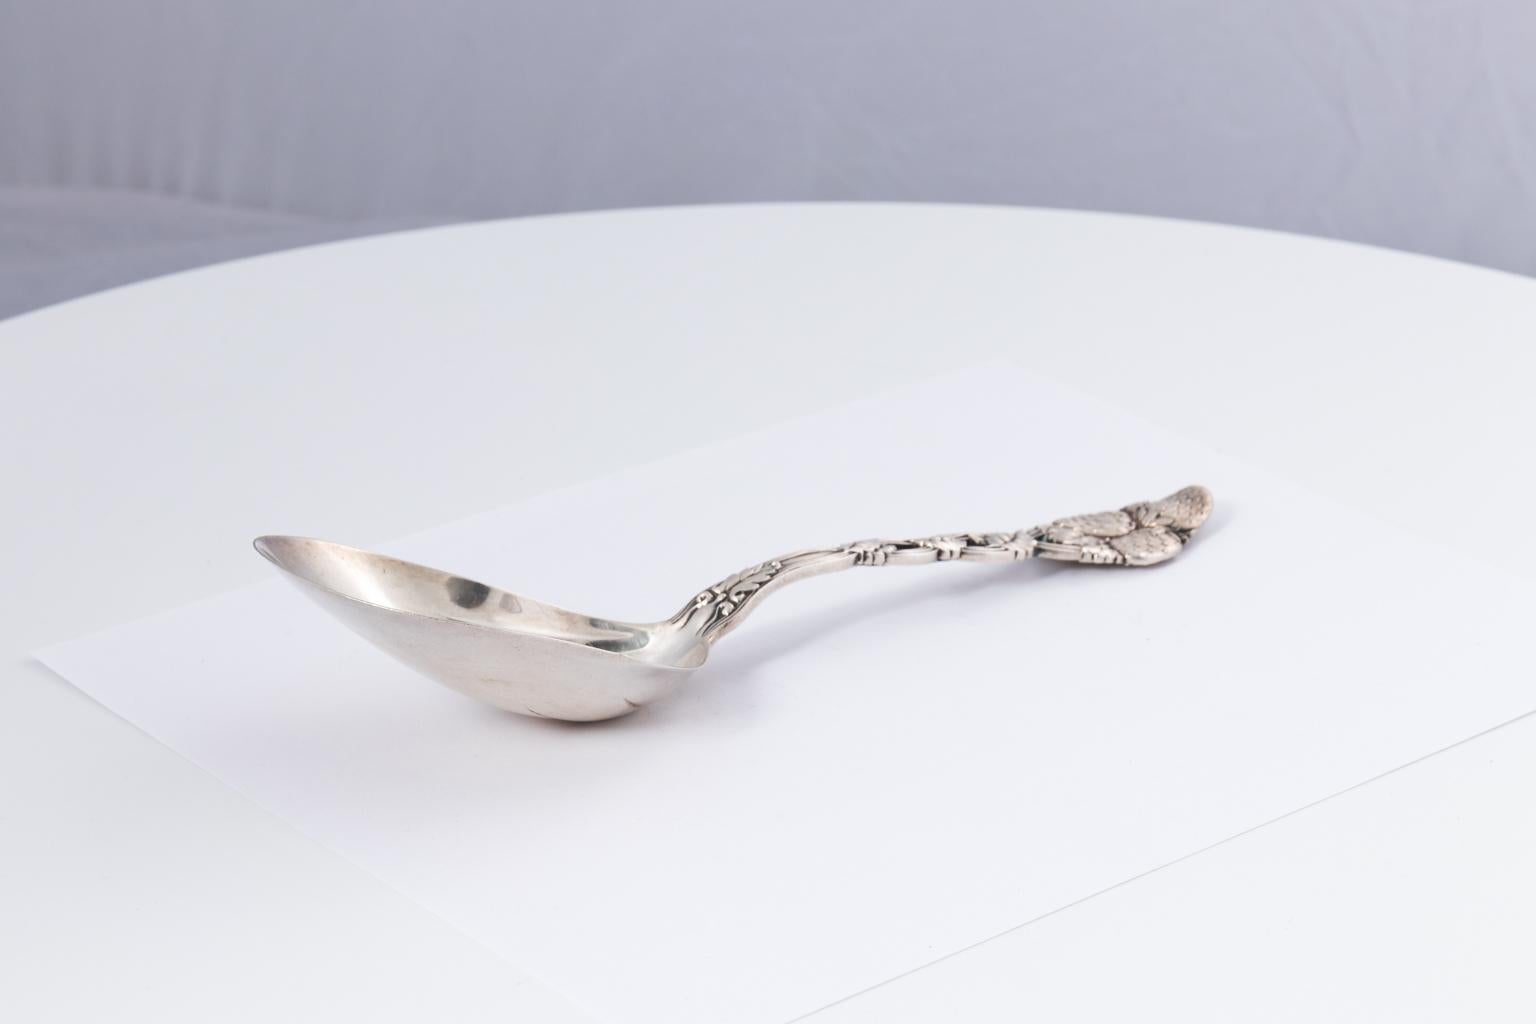 Tiffany & Company Sterling Silver Serving Spoon, circa 1875 In Good Condition For Sale In Stamford, CT